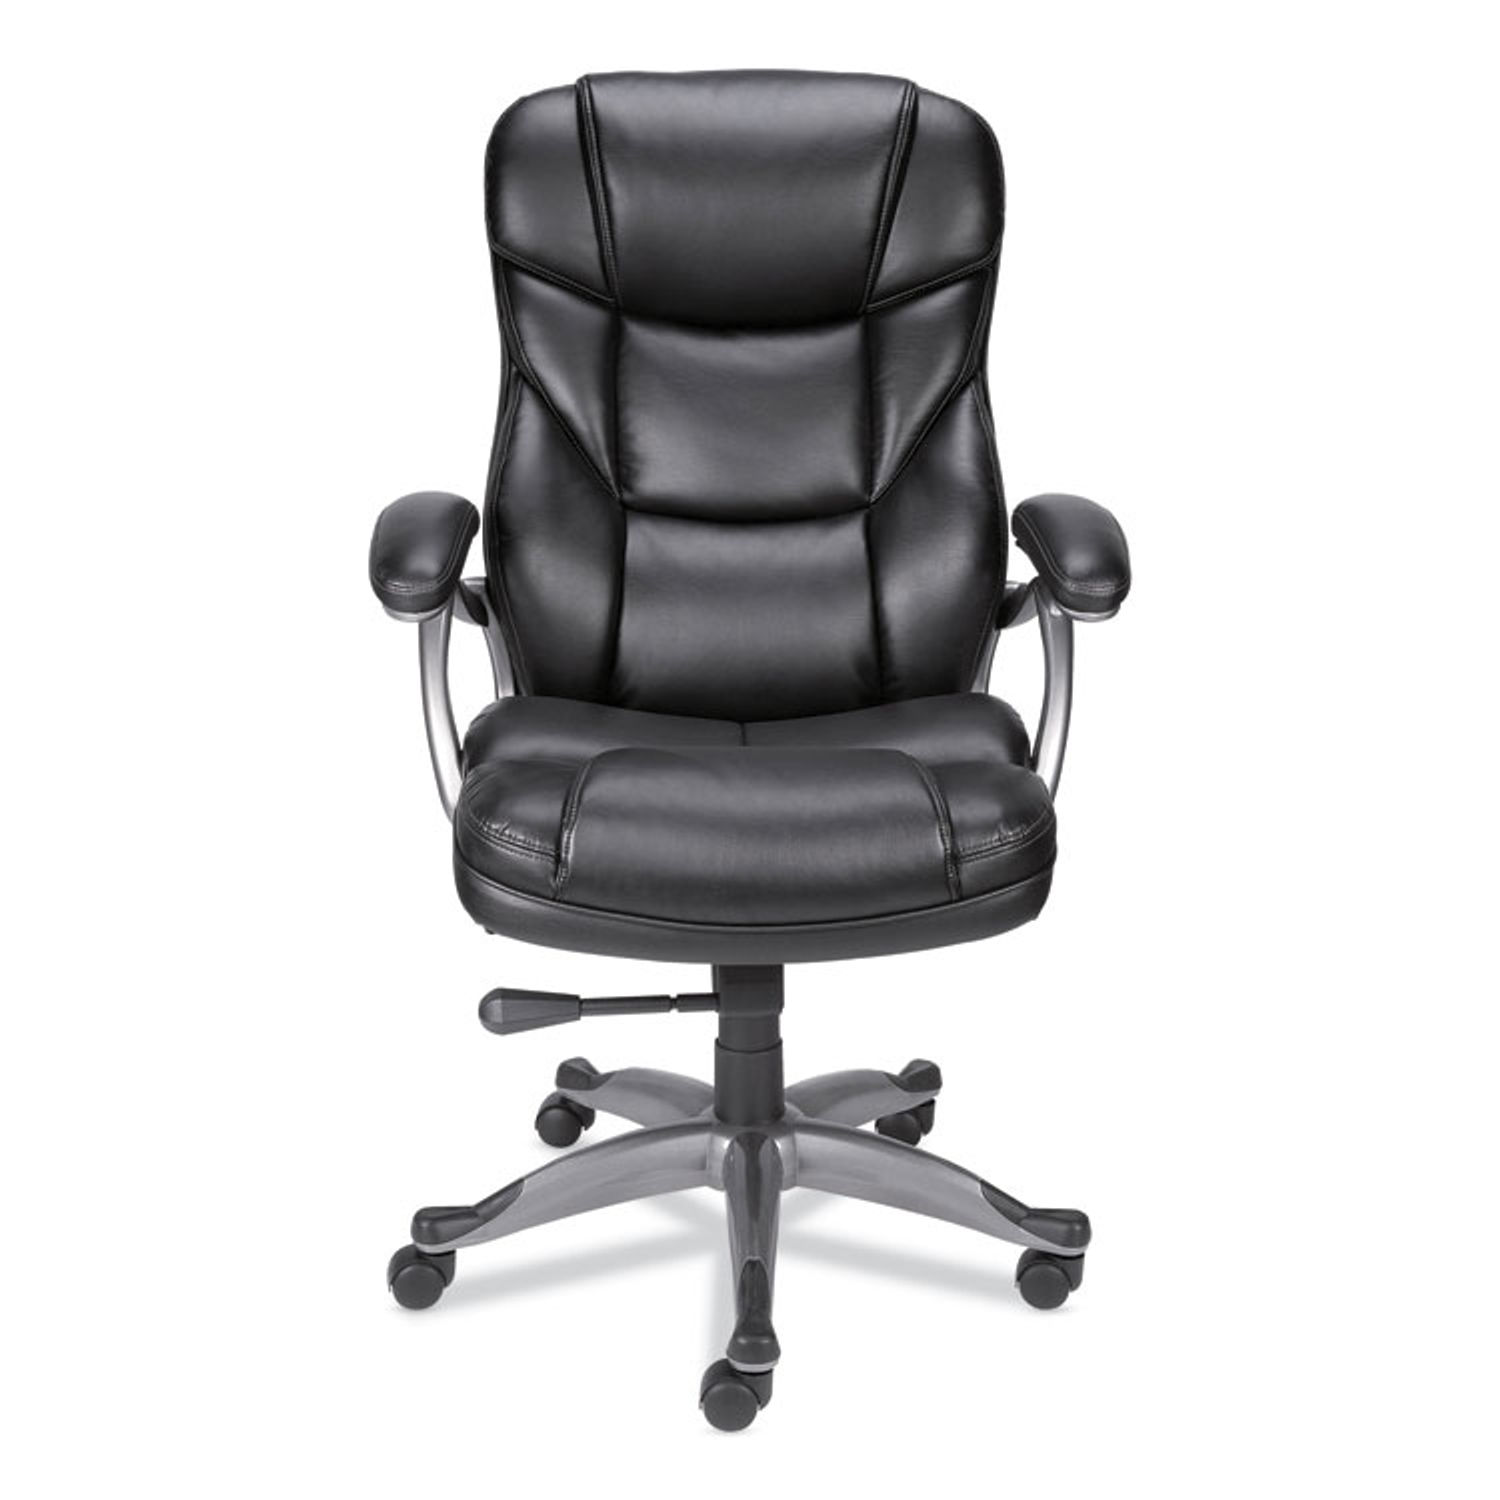 Alera Birns Series High-Back Task Chair Supports Up to 250 lb, 18.11" to 22.05" Seat Height, Black Seat/Back, Chrome Base